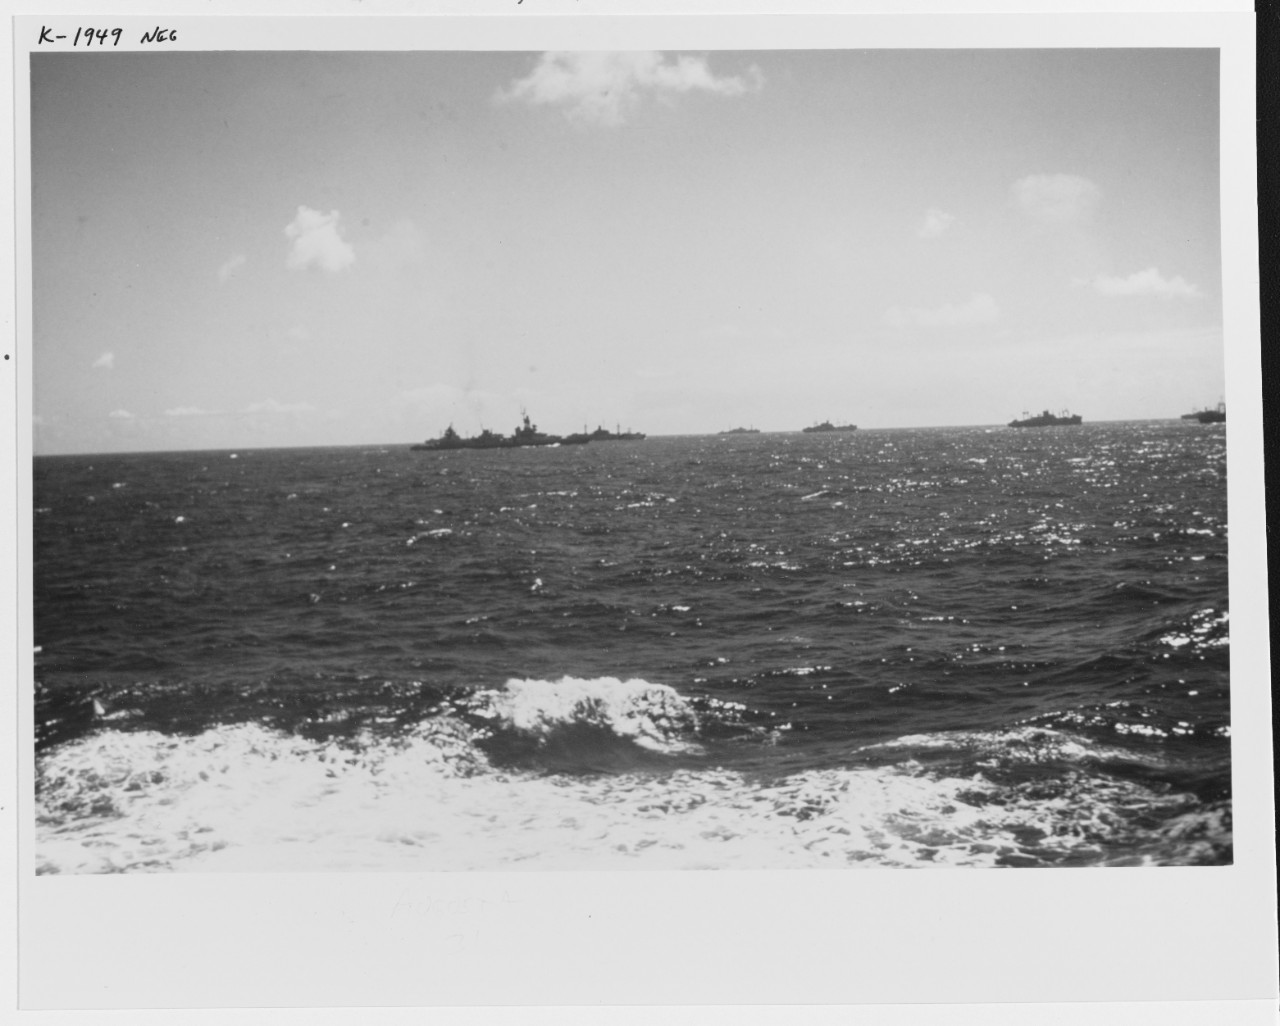 Convoy at sea, probably at the time of the Southern France Operation, August 1944